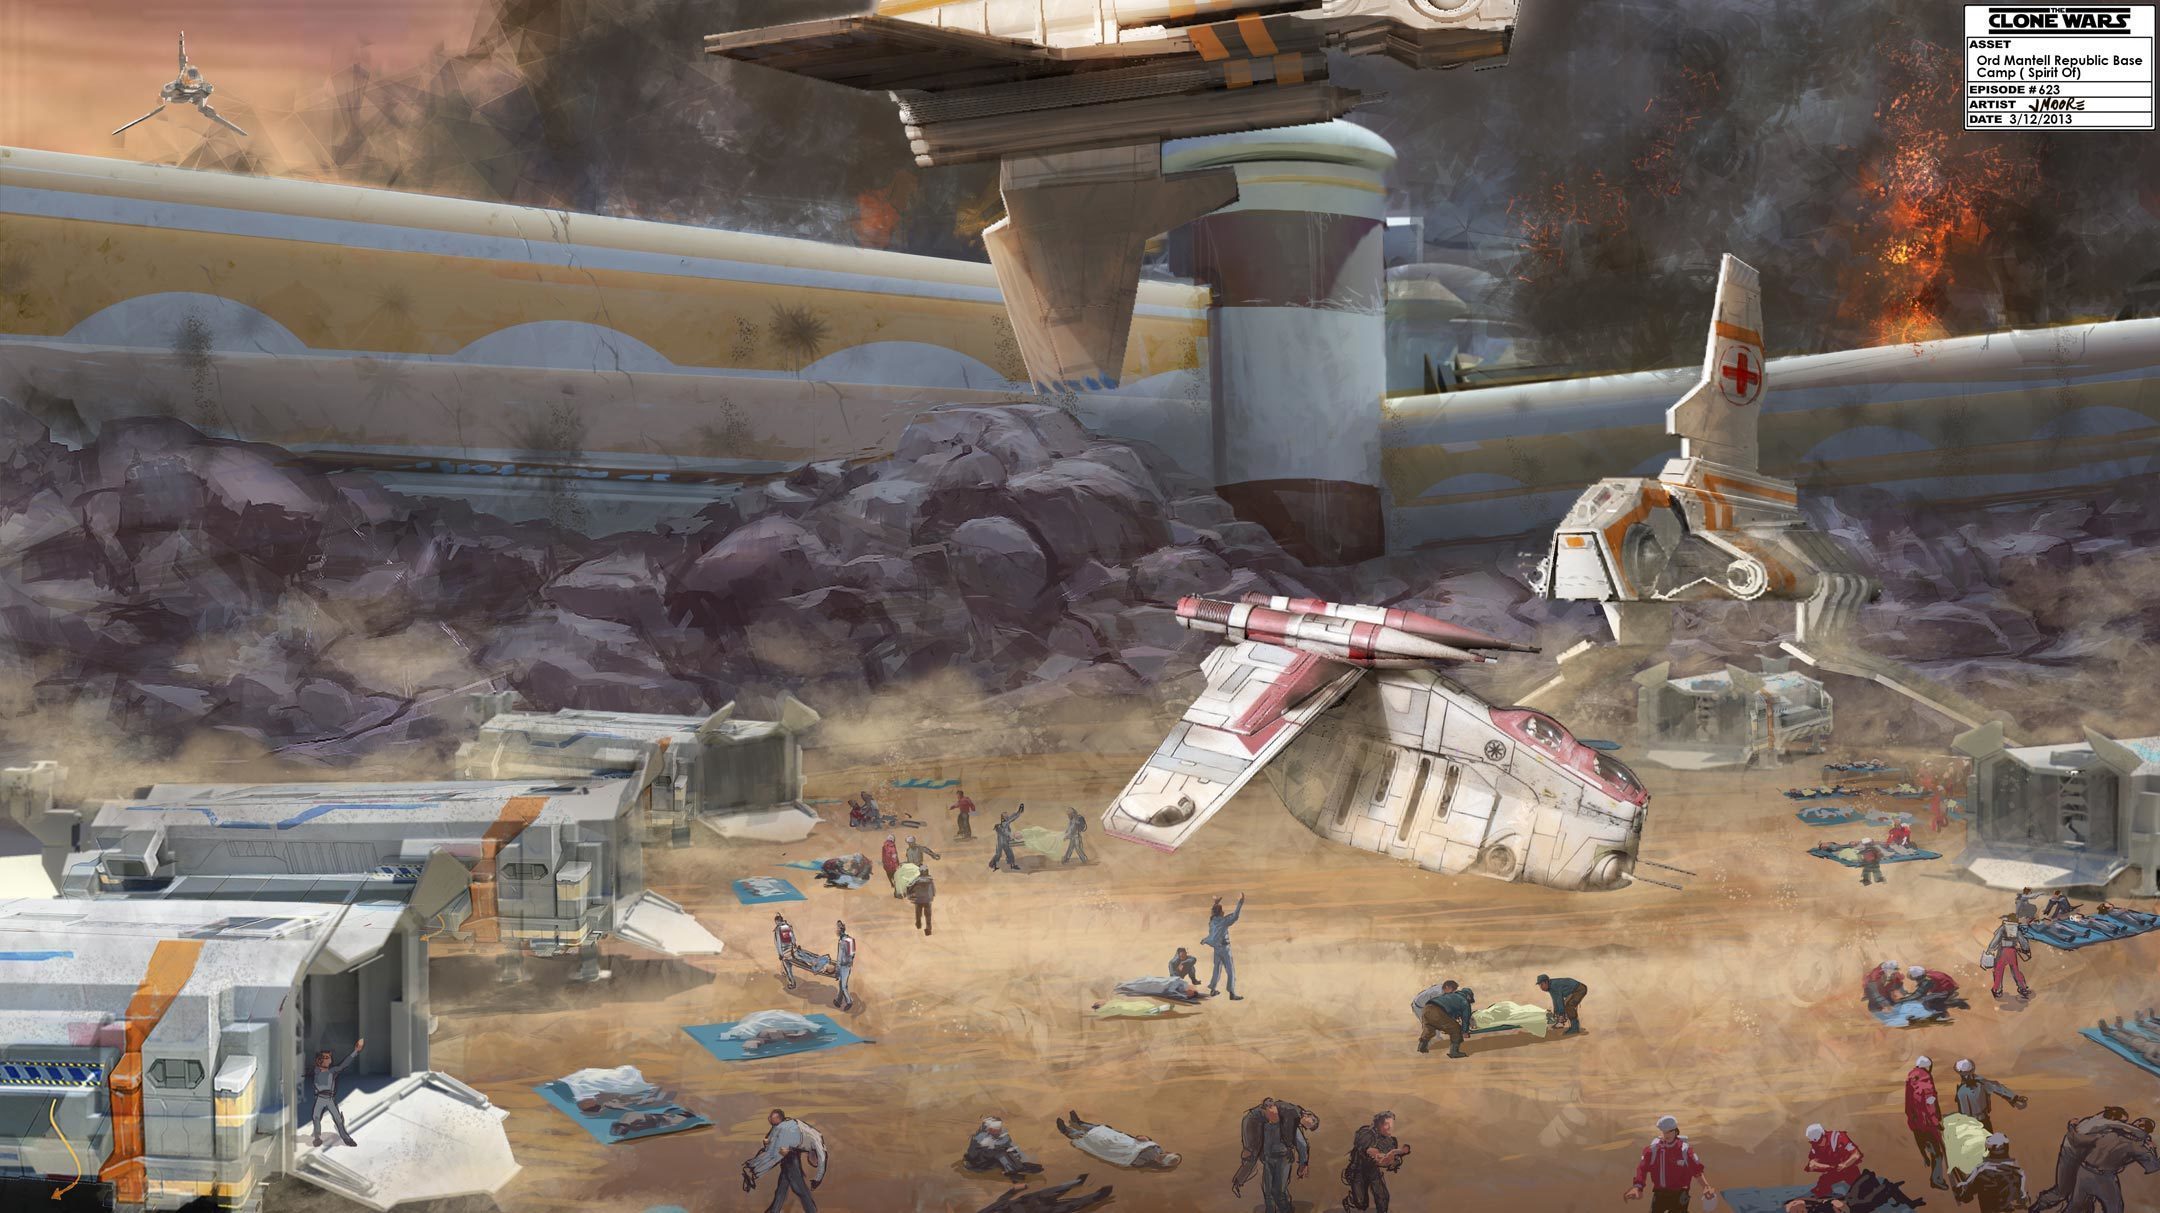 The Republic base on Ord Mantell concept art by Jim Moore, March 12, 2013.